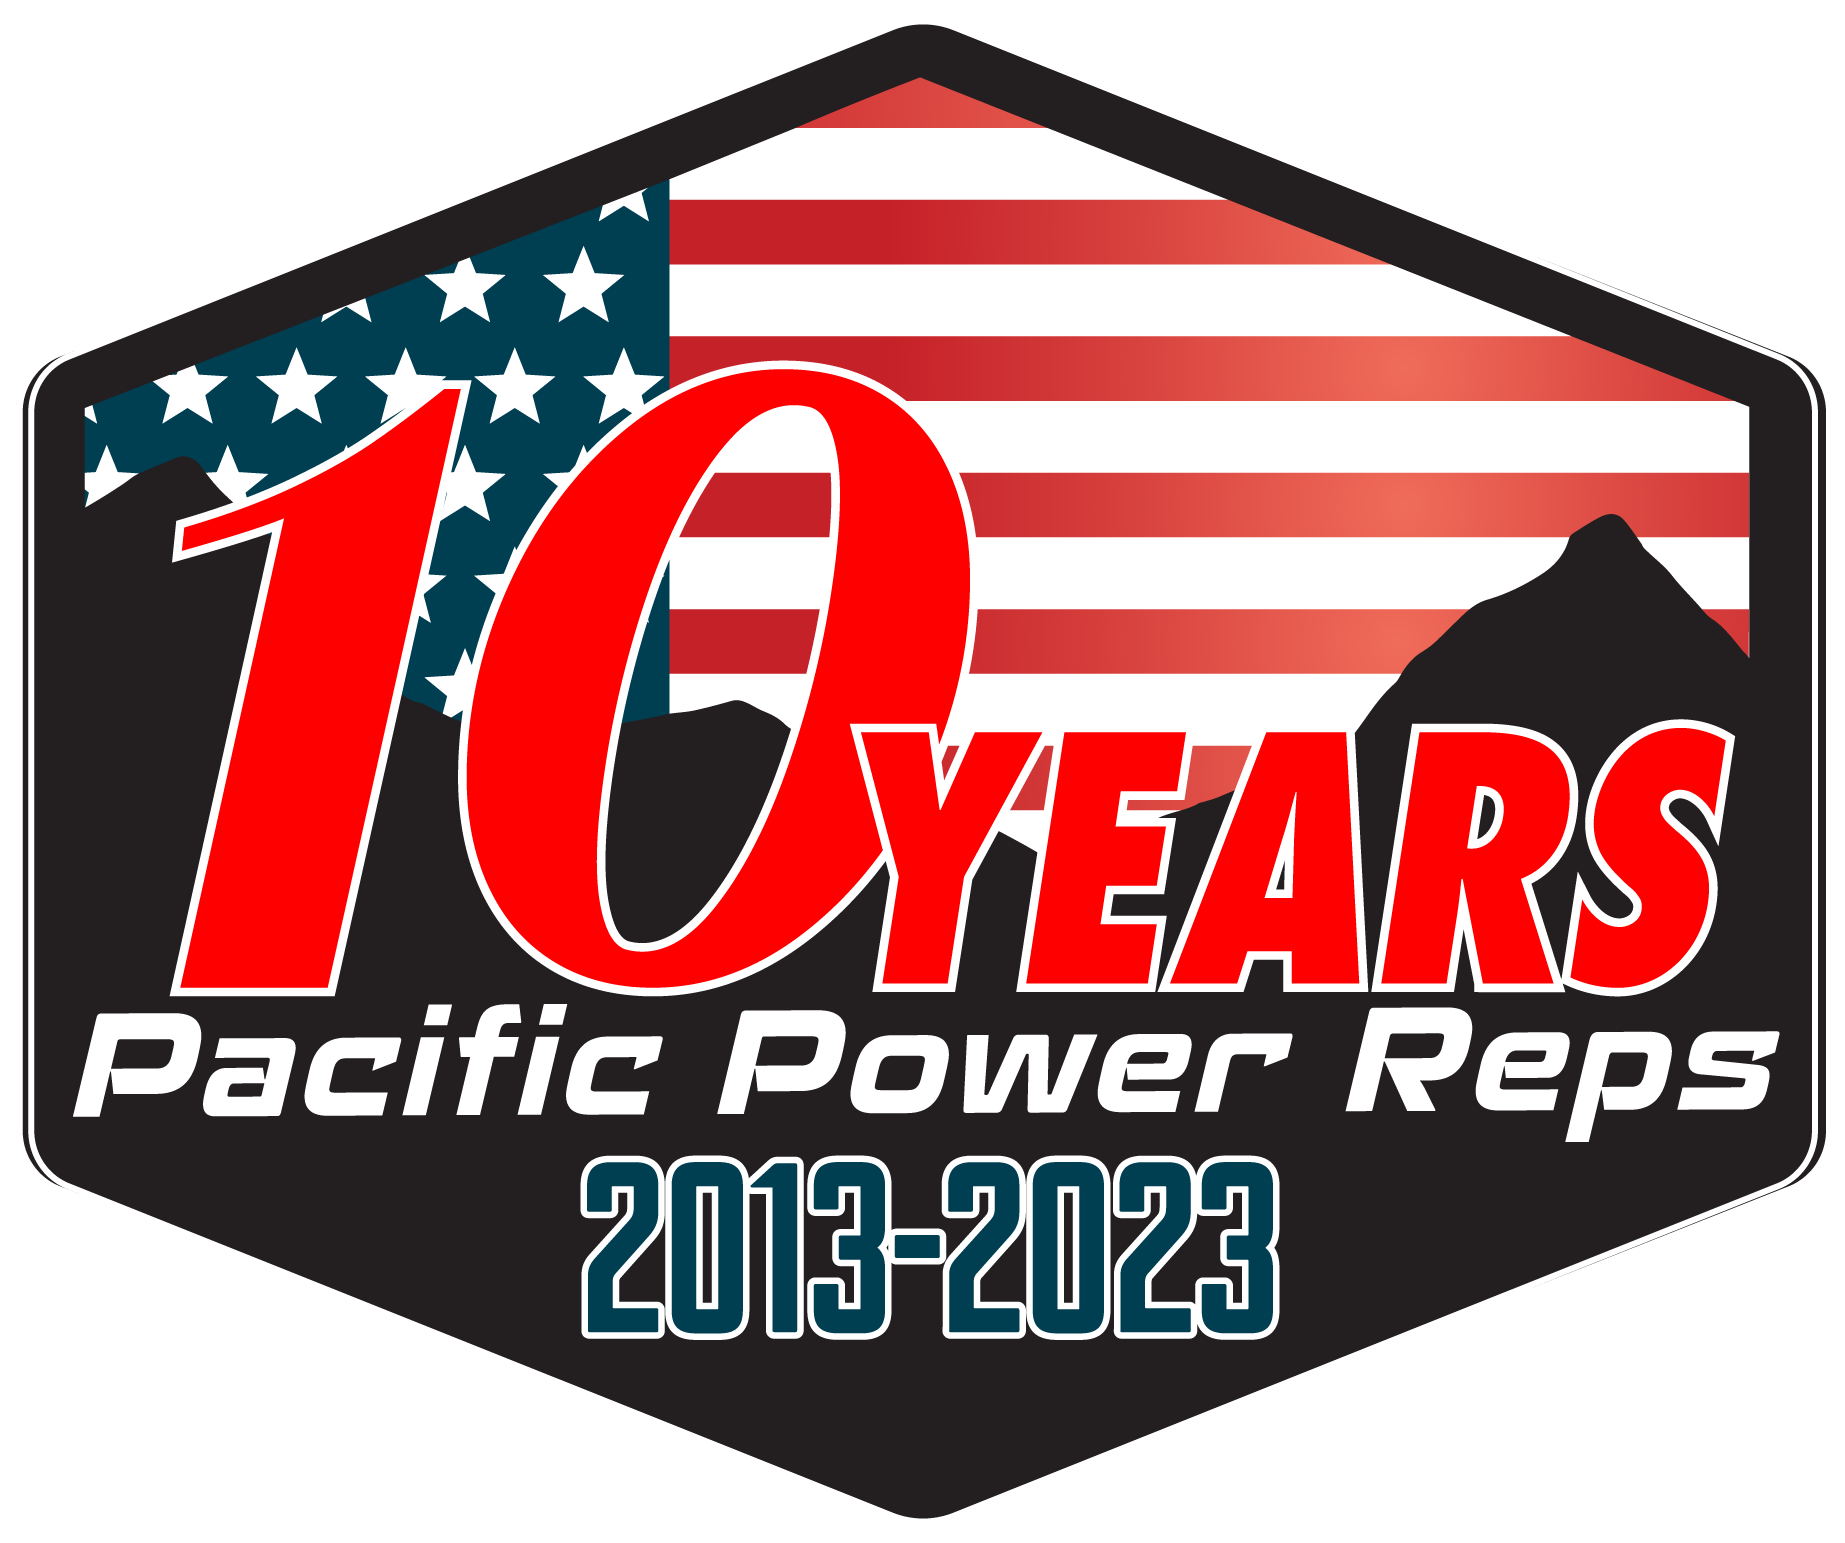 Power and Utility Industry Manufacturer Reps_Pacific Power Reps